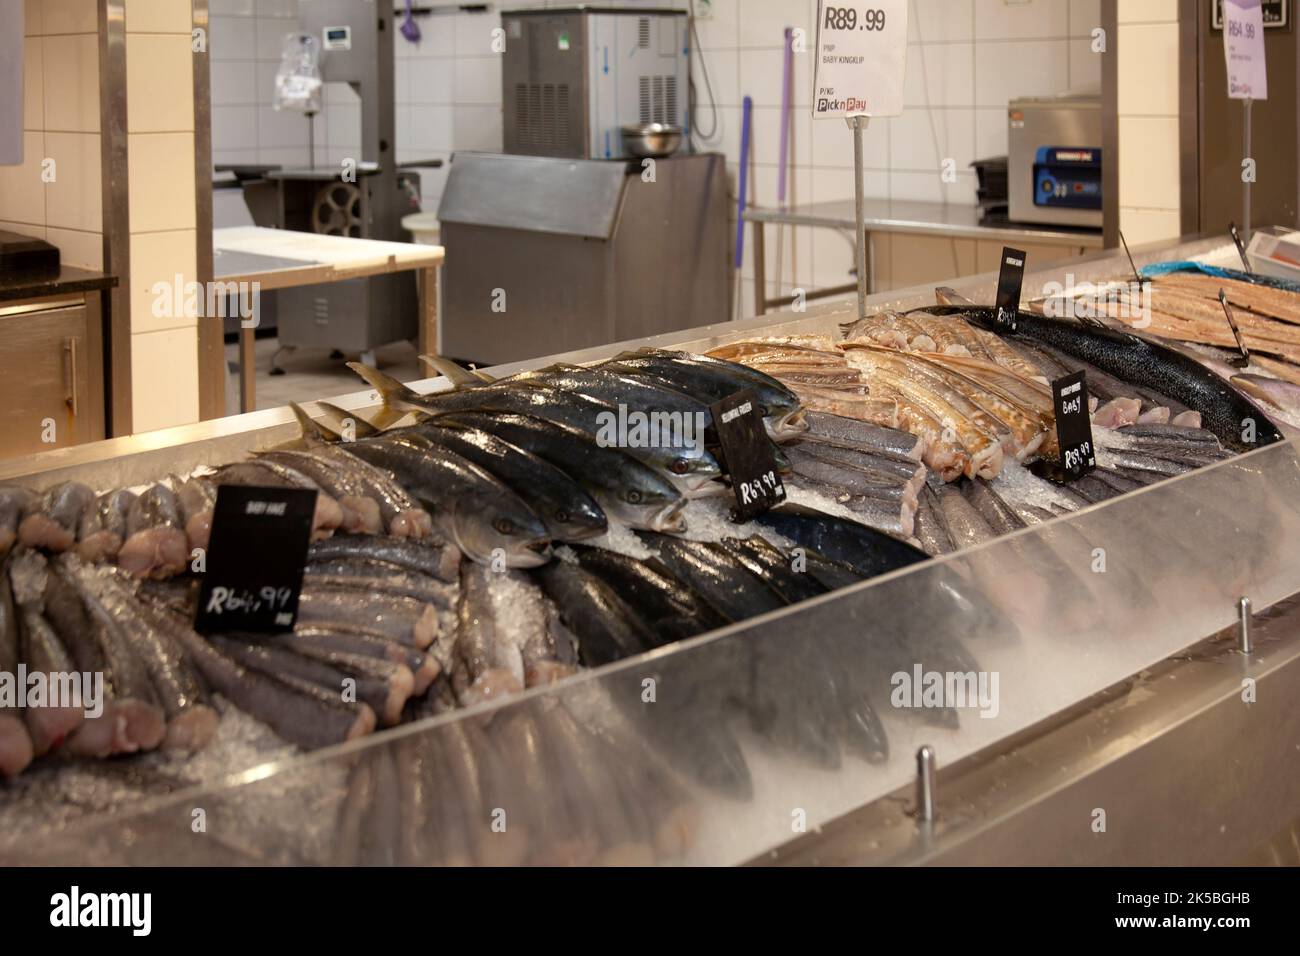 Fish Display Pick N Pay Grocery Store in Cape Town, South Africa Stock Photo